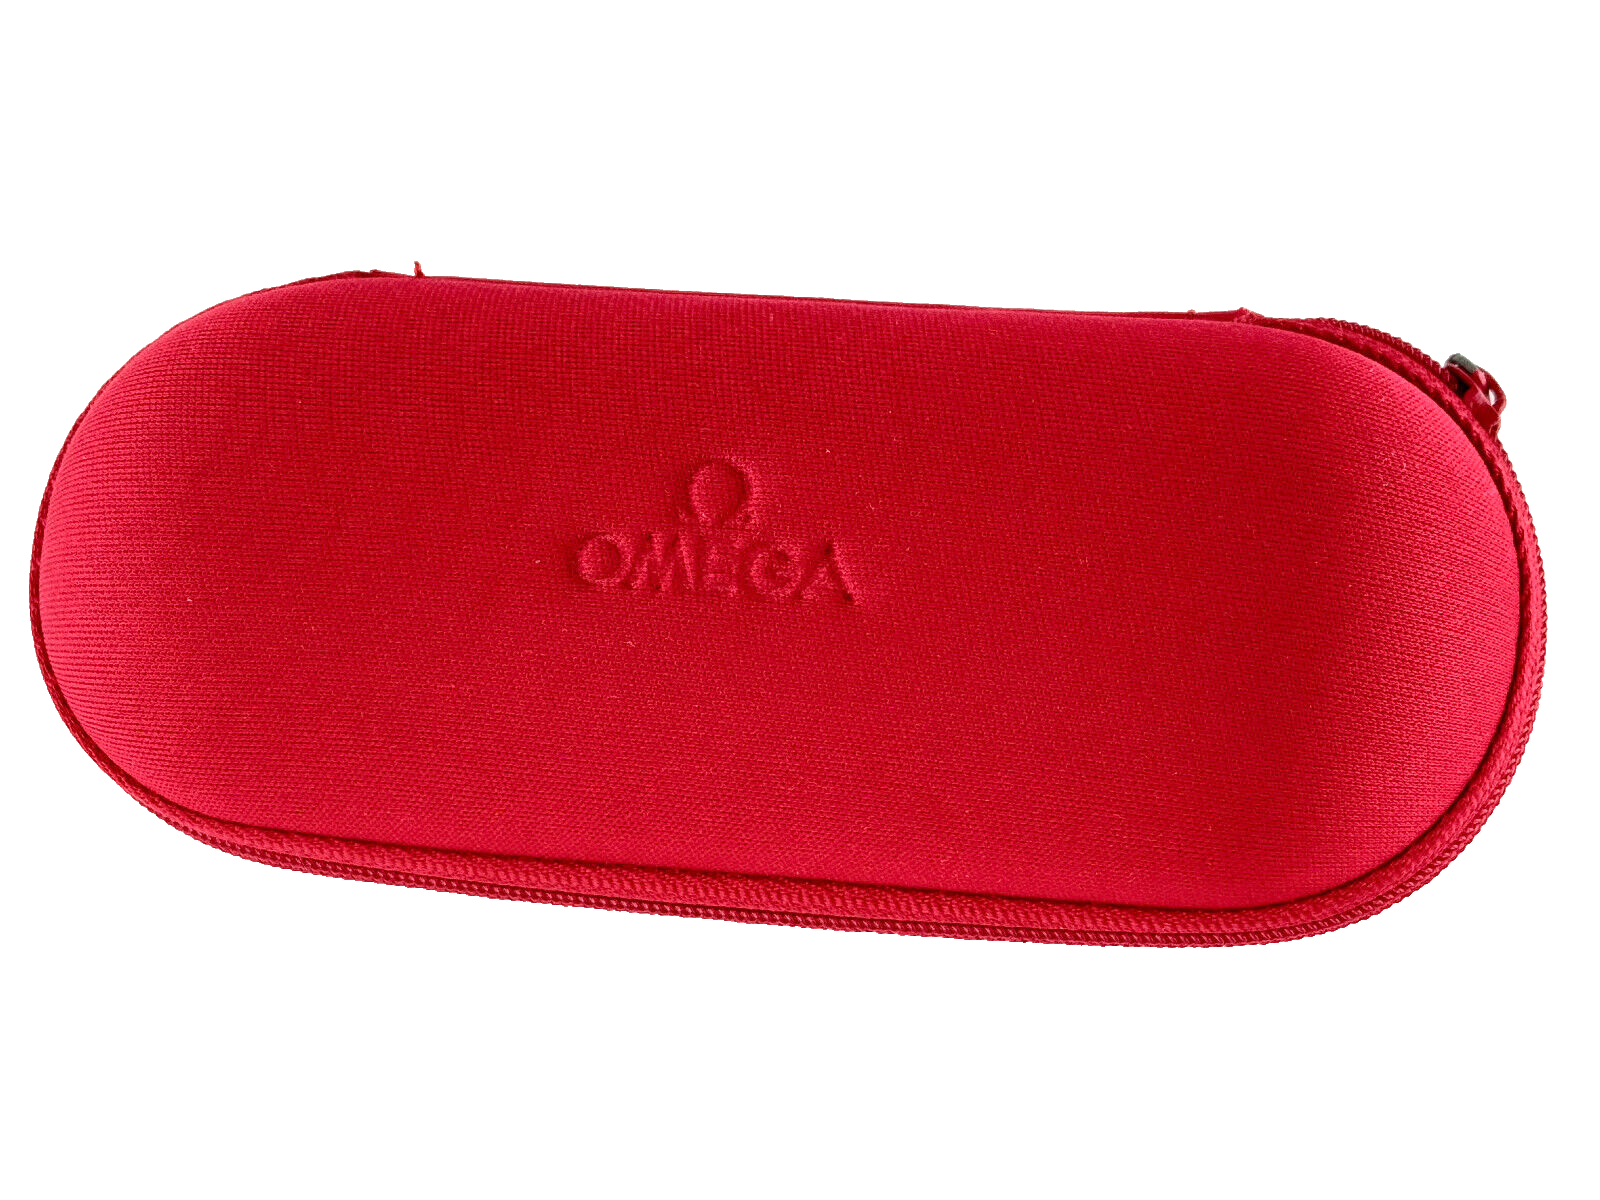 Omega watch case red